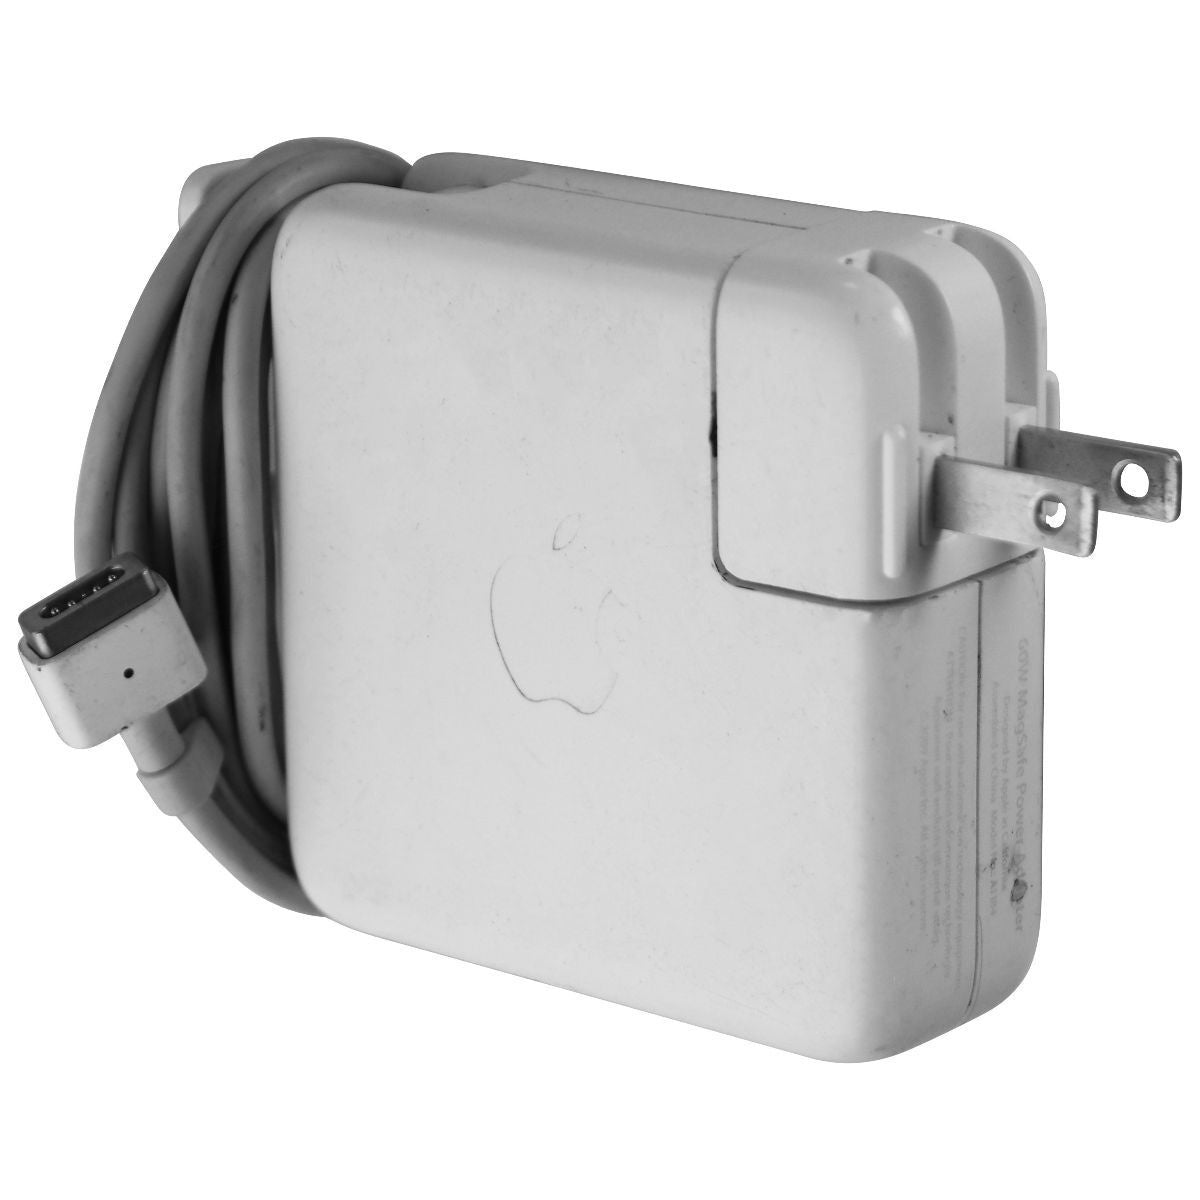 Apple 60W MagSafe Power Adapter - White (A1184, Old Model) - Folding Plug Only Computer Accessories - Laptop Power Adapters/Chargers Apple    - Simple Cell Bulk Wholesale Pricing - USA Seller